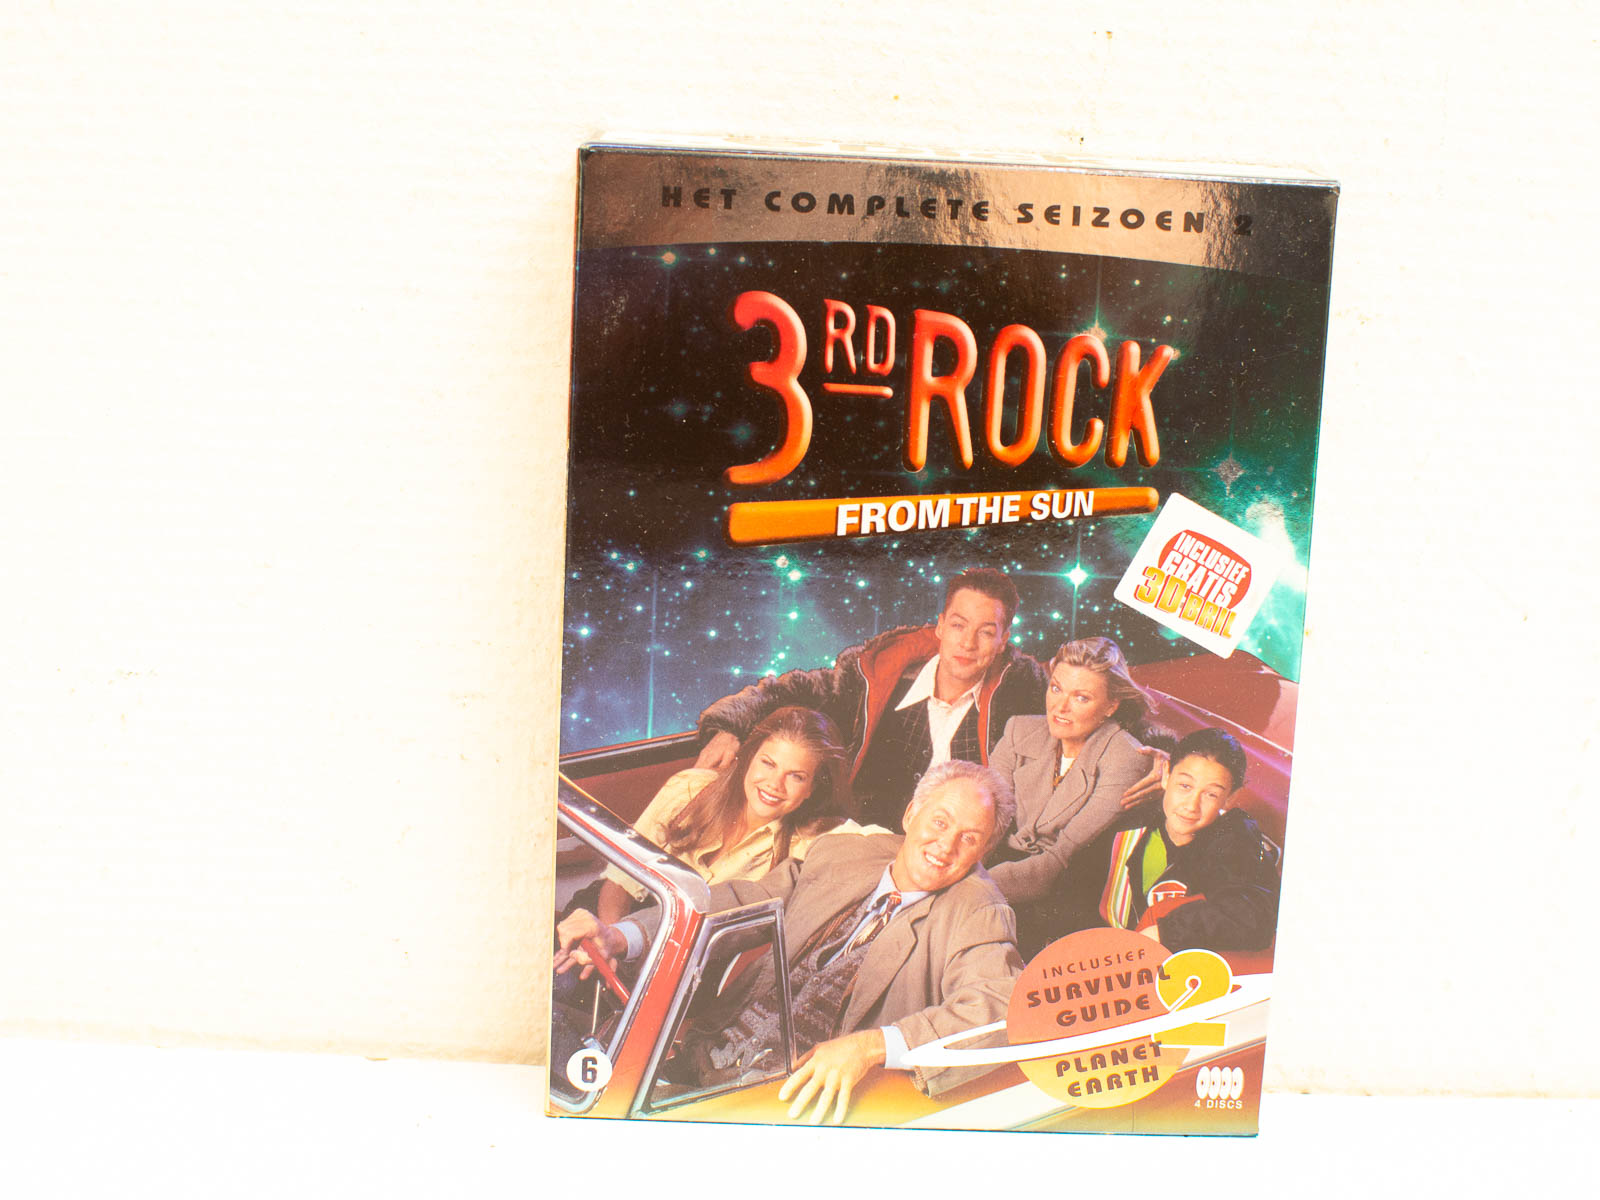 3 rd rock from the sun 36662